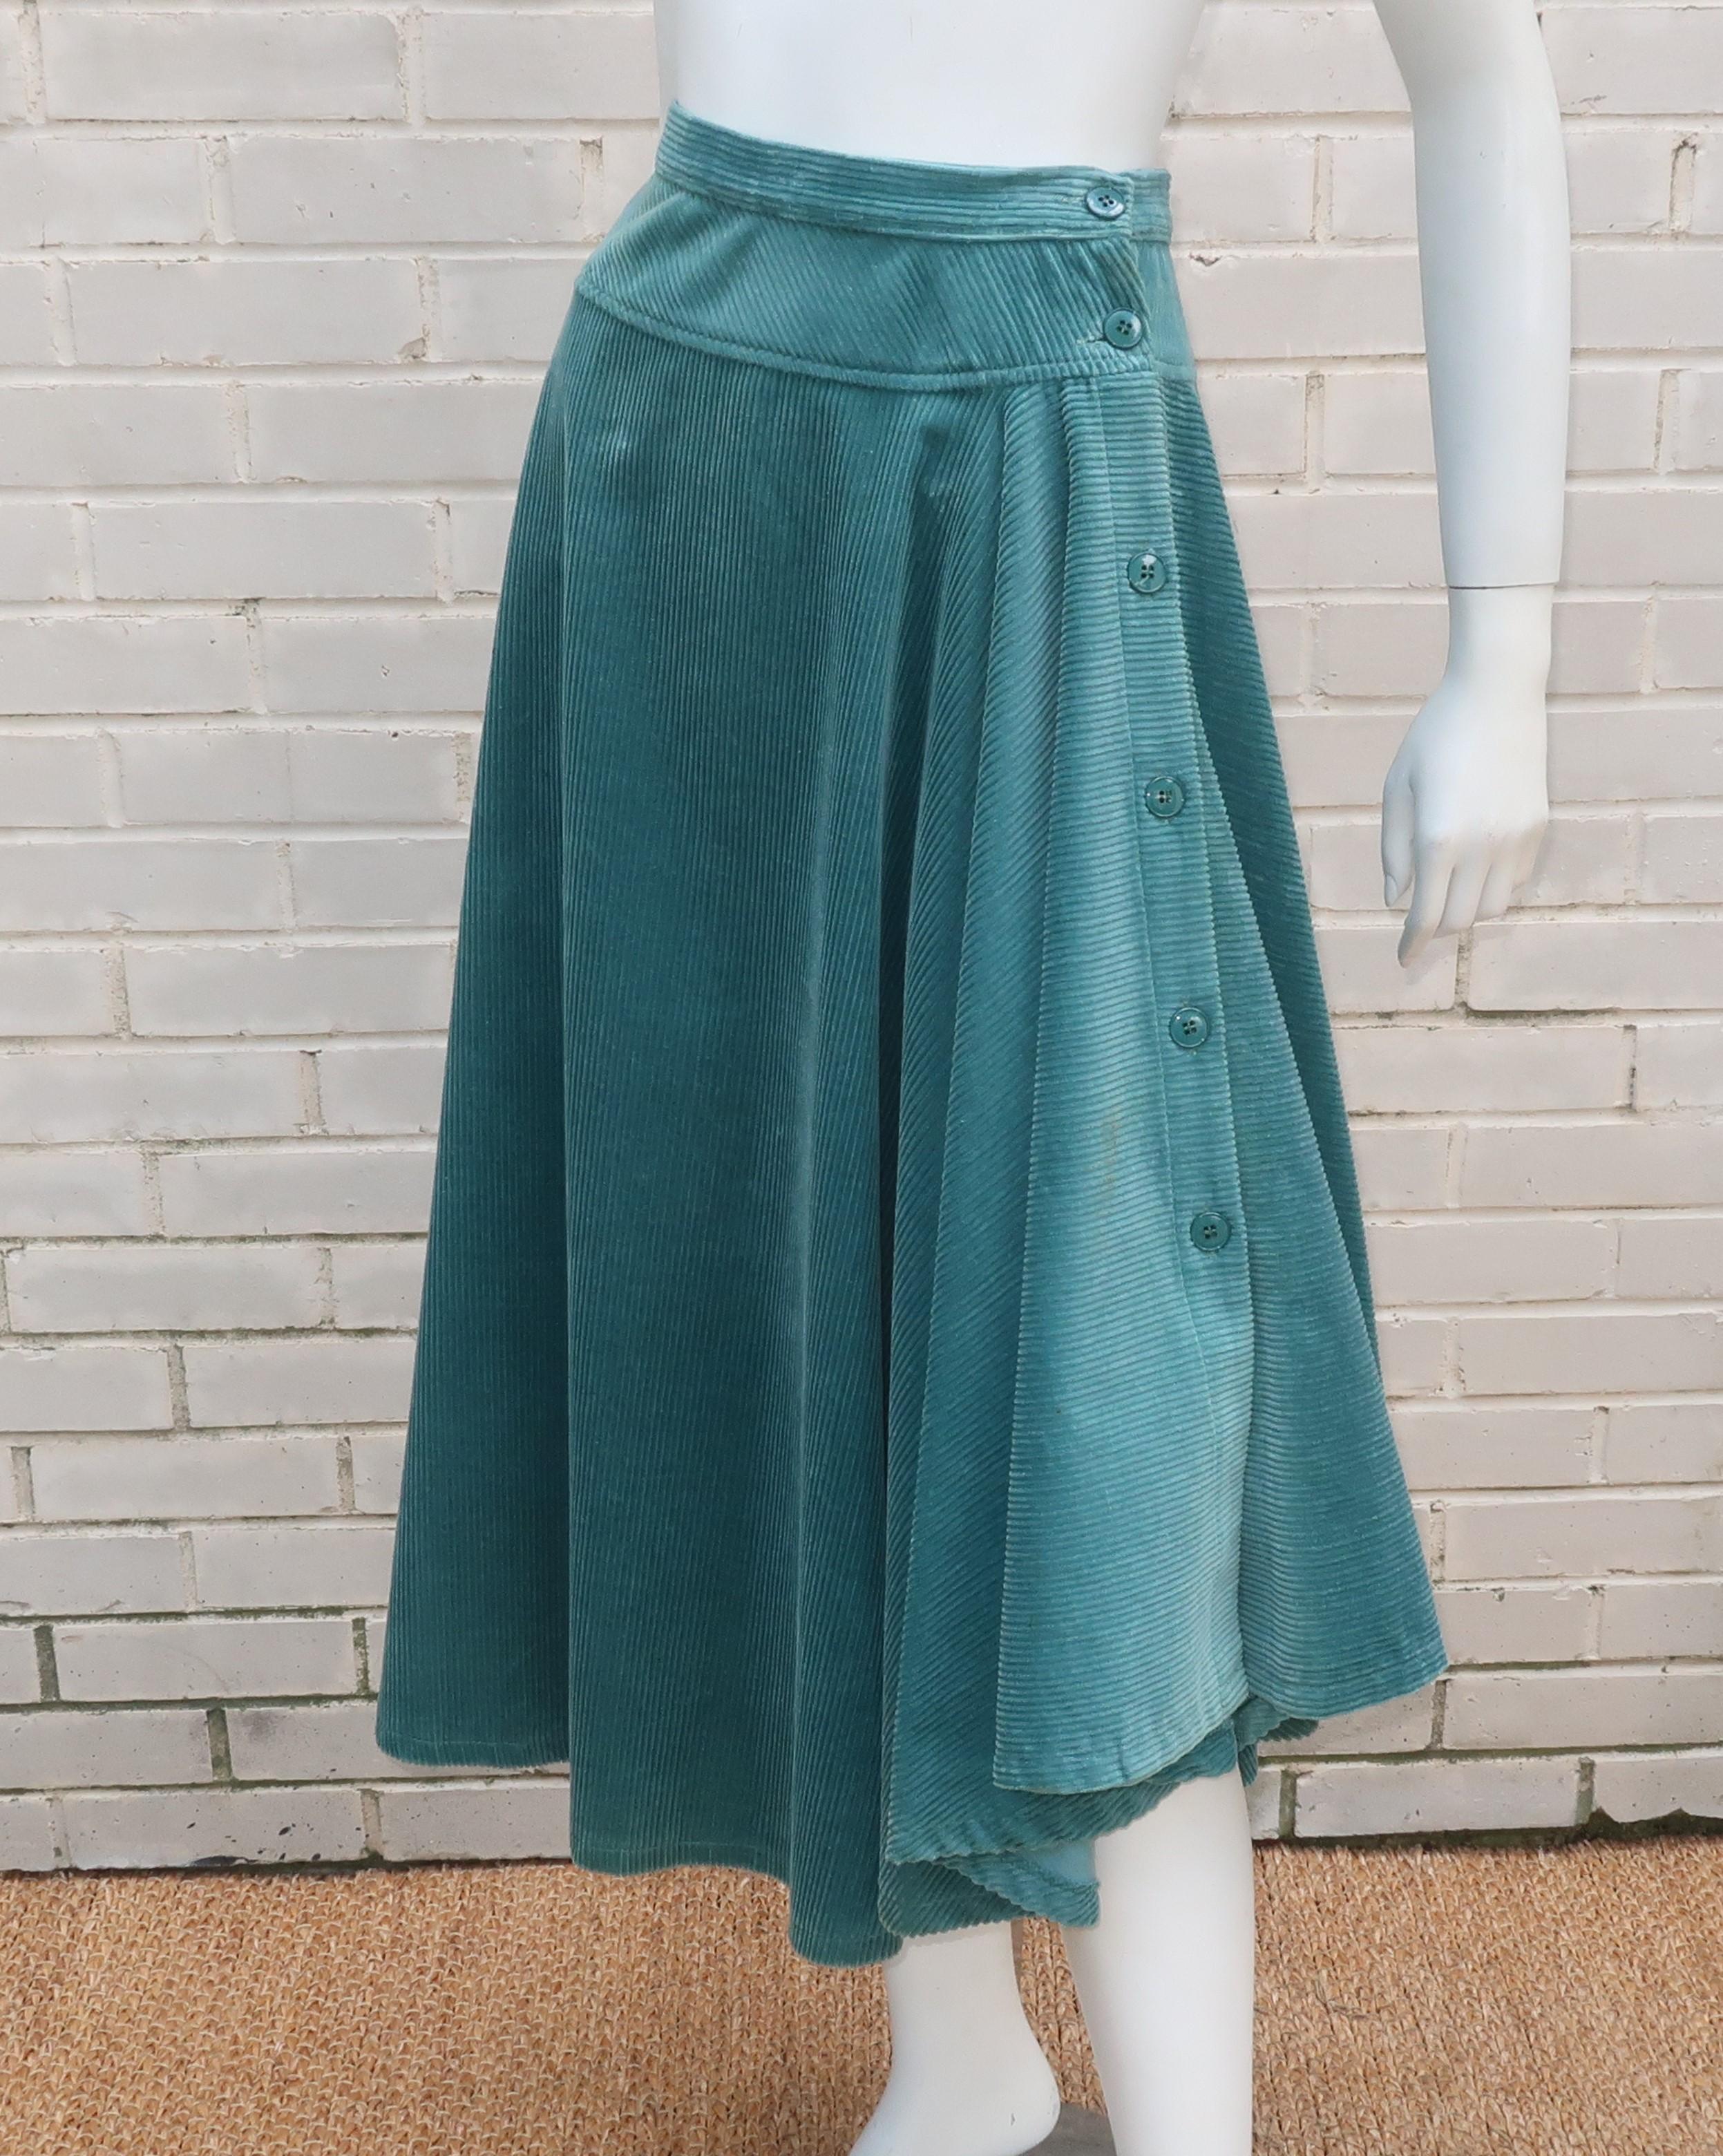 1970’s sea foam green wide wale corduroy skirt by Kenzo for his early Jungle Jap label.  The unique design buttons up on the side with a handkerchief style hemline and an asymmetrical cut.  Perfect to pair with a cropped sweater or